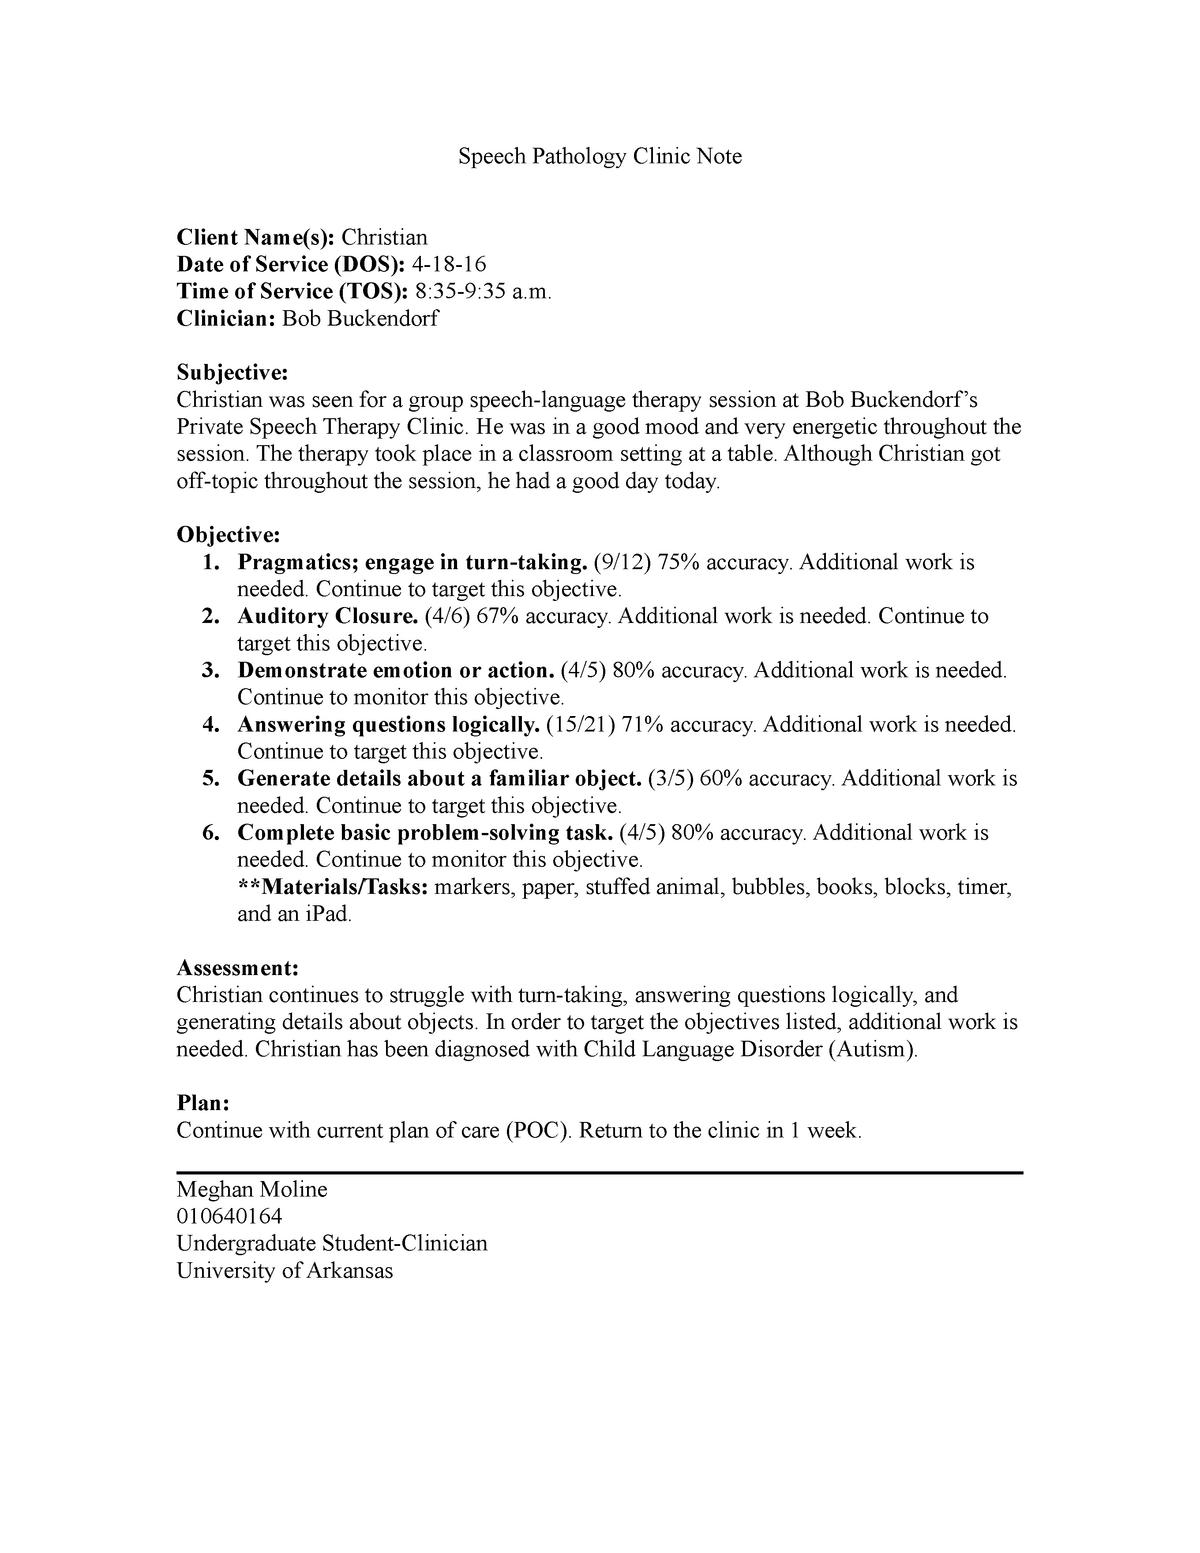 SOAP#21 - Completed SOAP note - Speech Pathology Clinic Note Regarding Speech Therapy Progress Notes Template